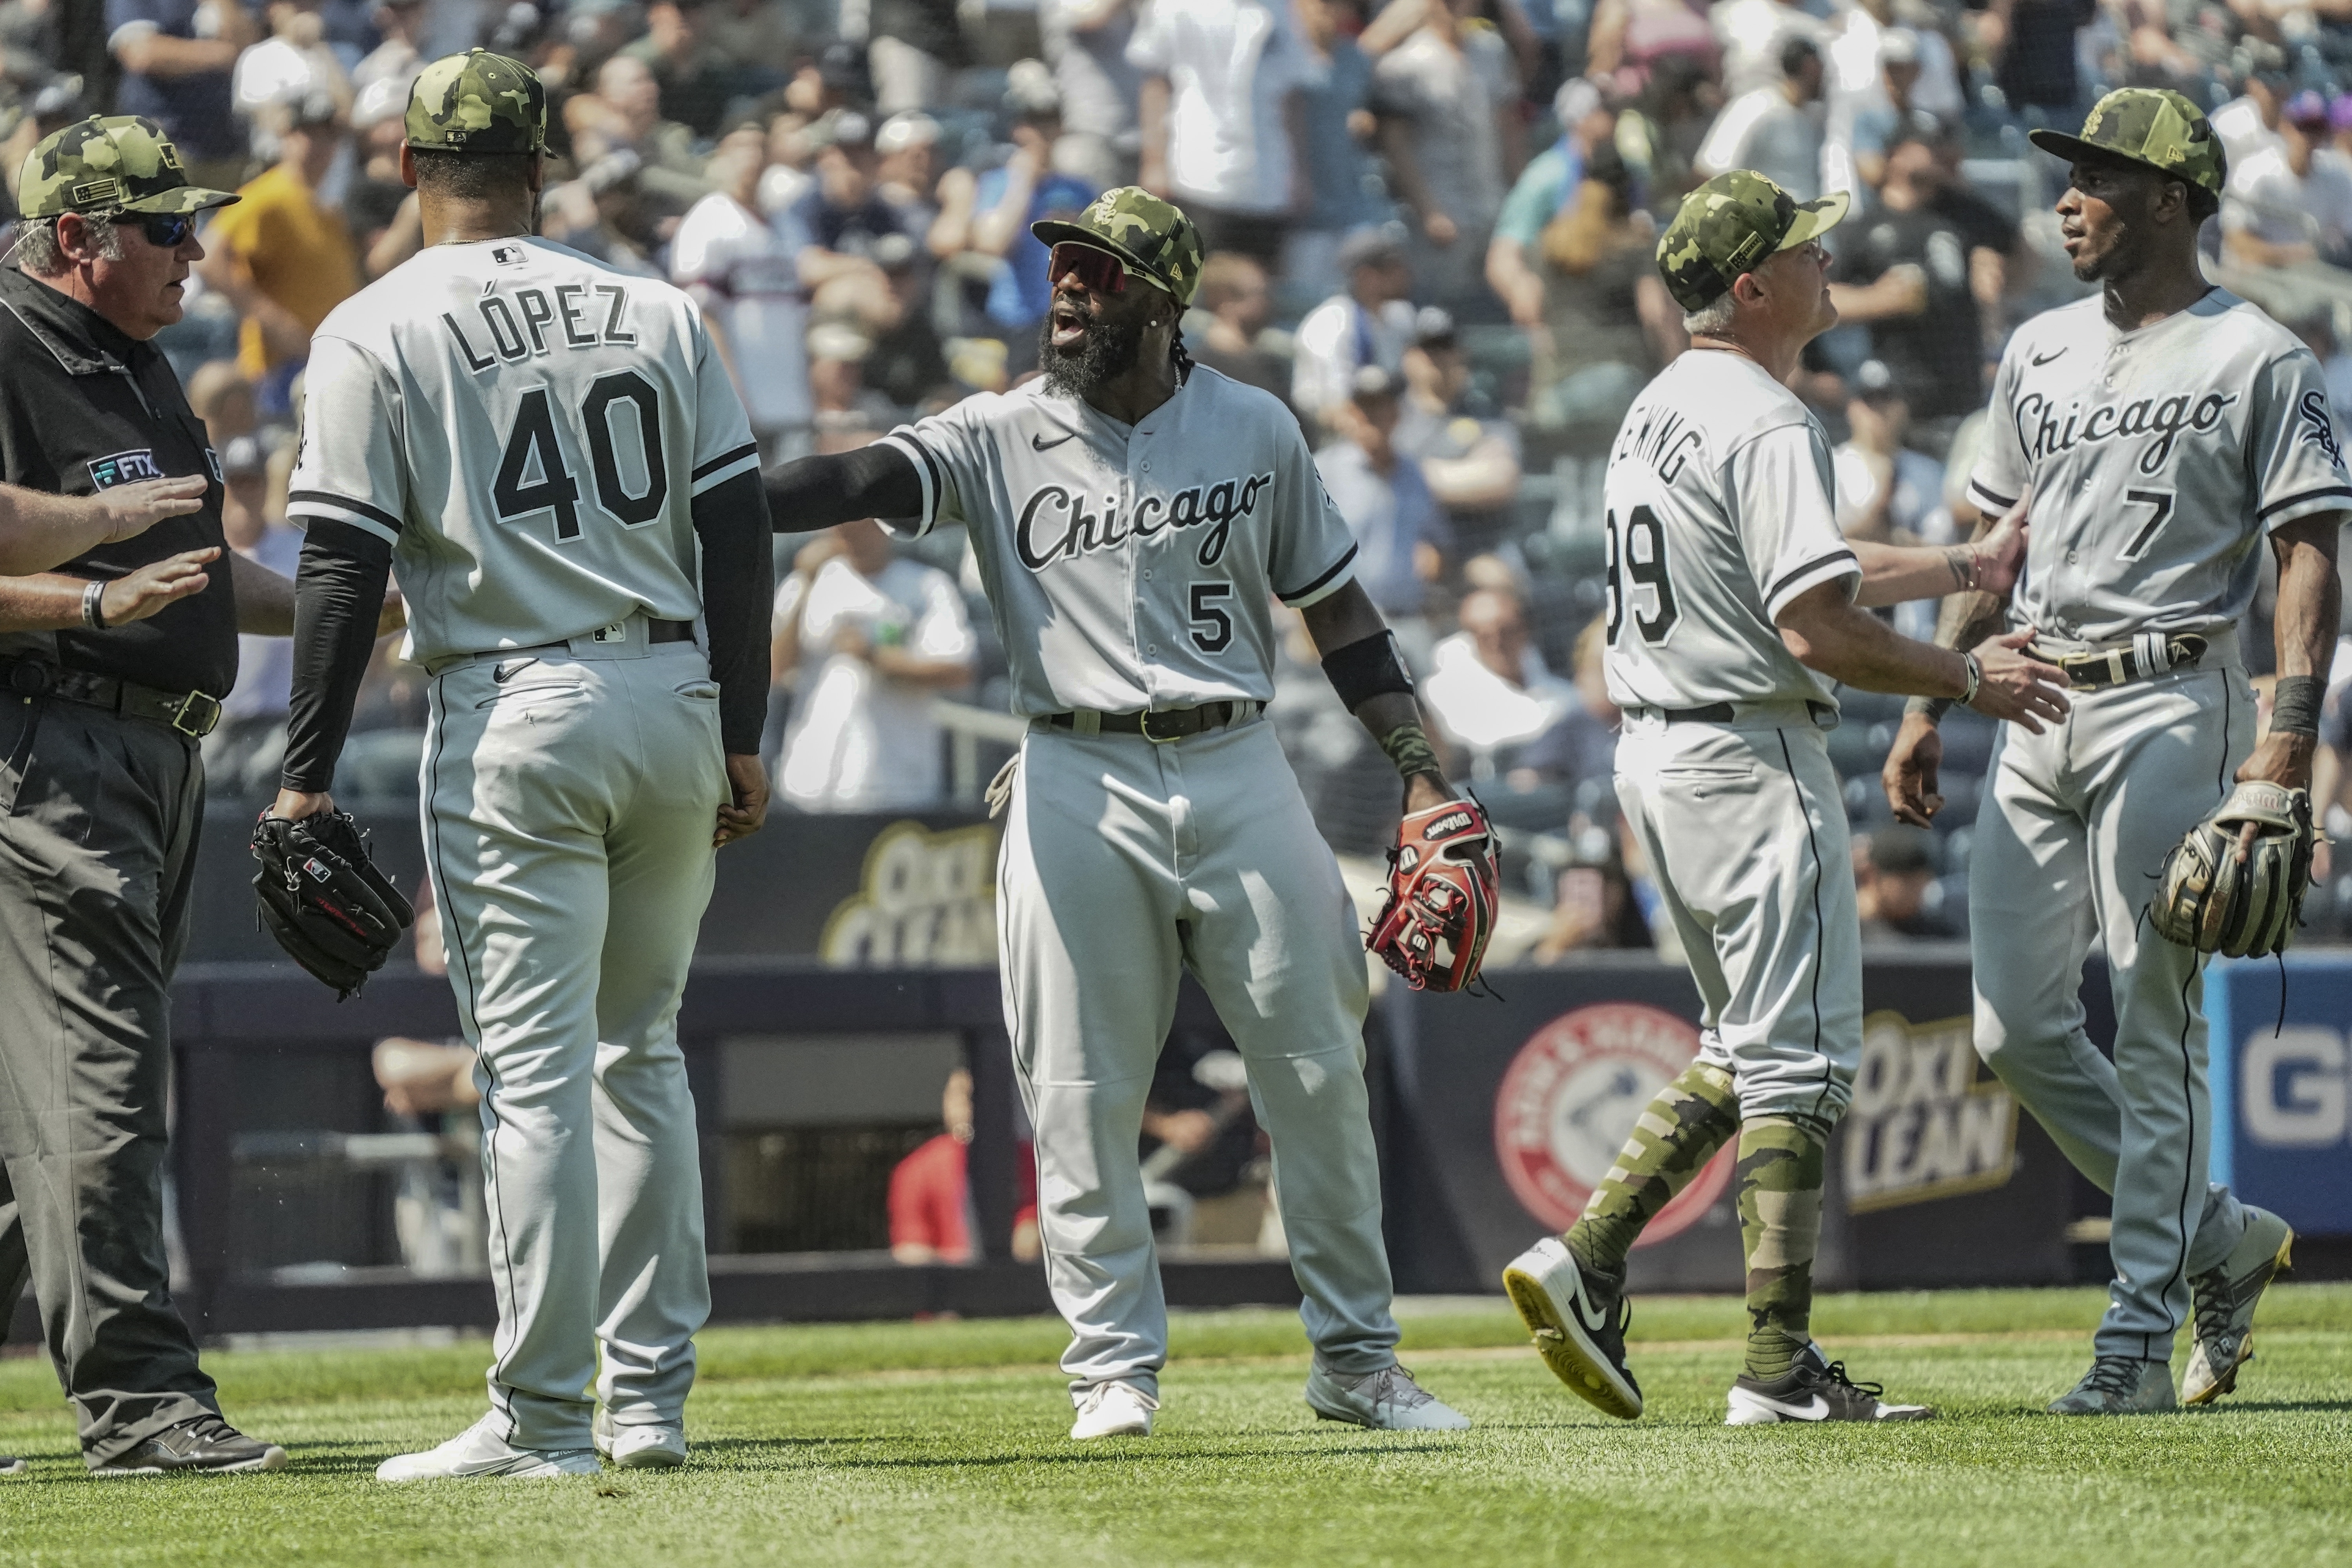 How to Watch the White Sox vs. Pirates Game: Streaming & TV Info